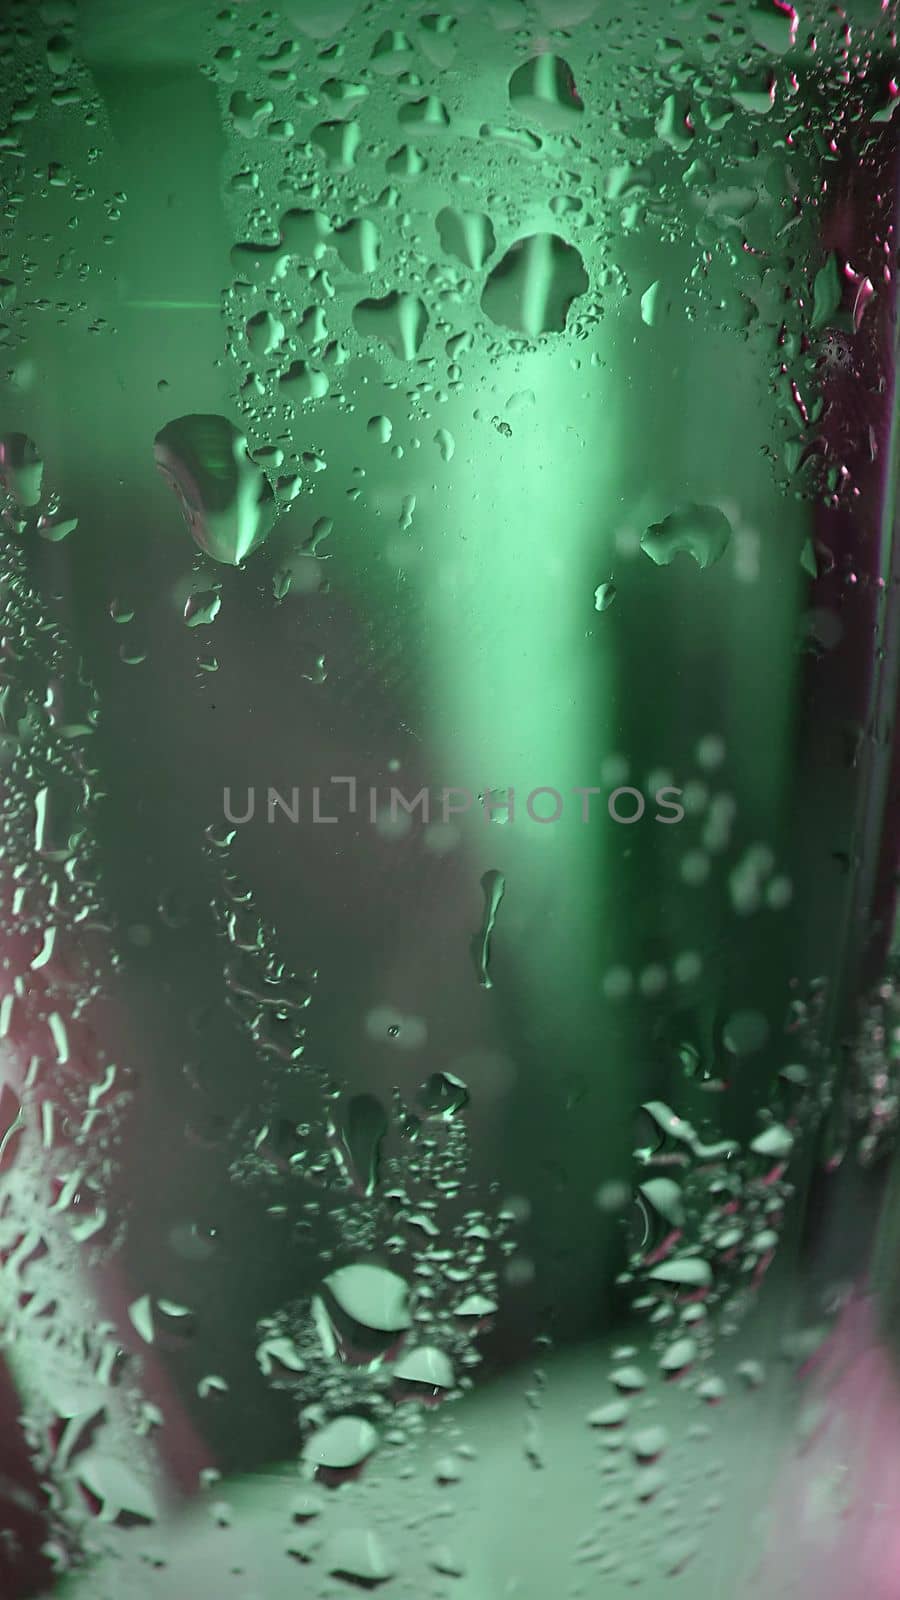 Macro photography.Condensation drops on the glass surface of the glass with green illumination .Texture or background